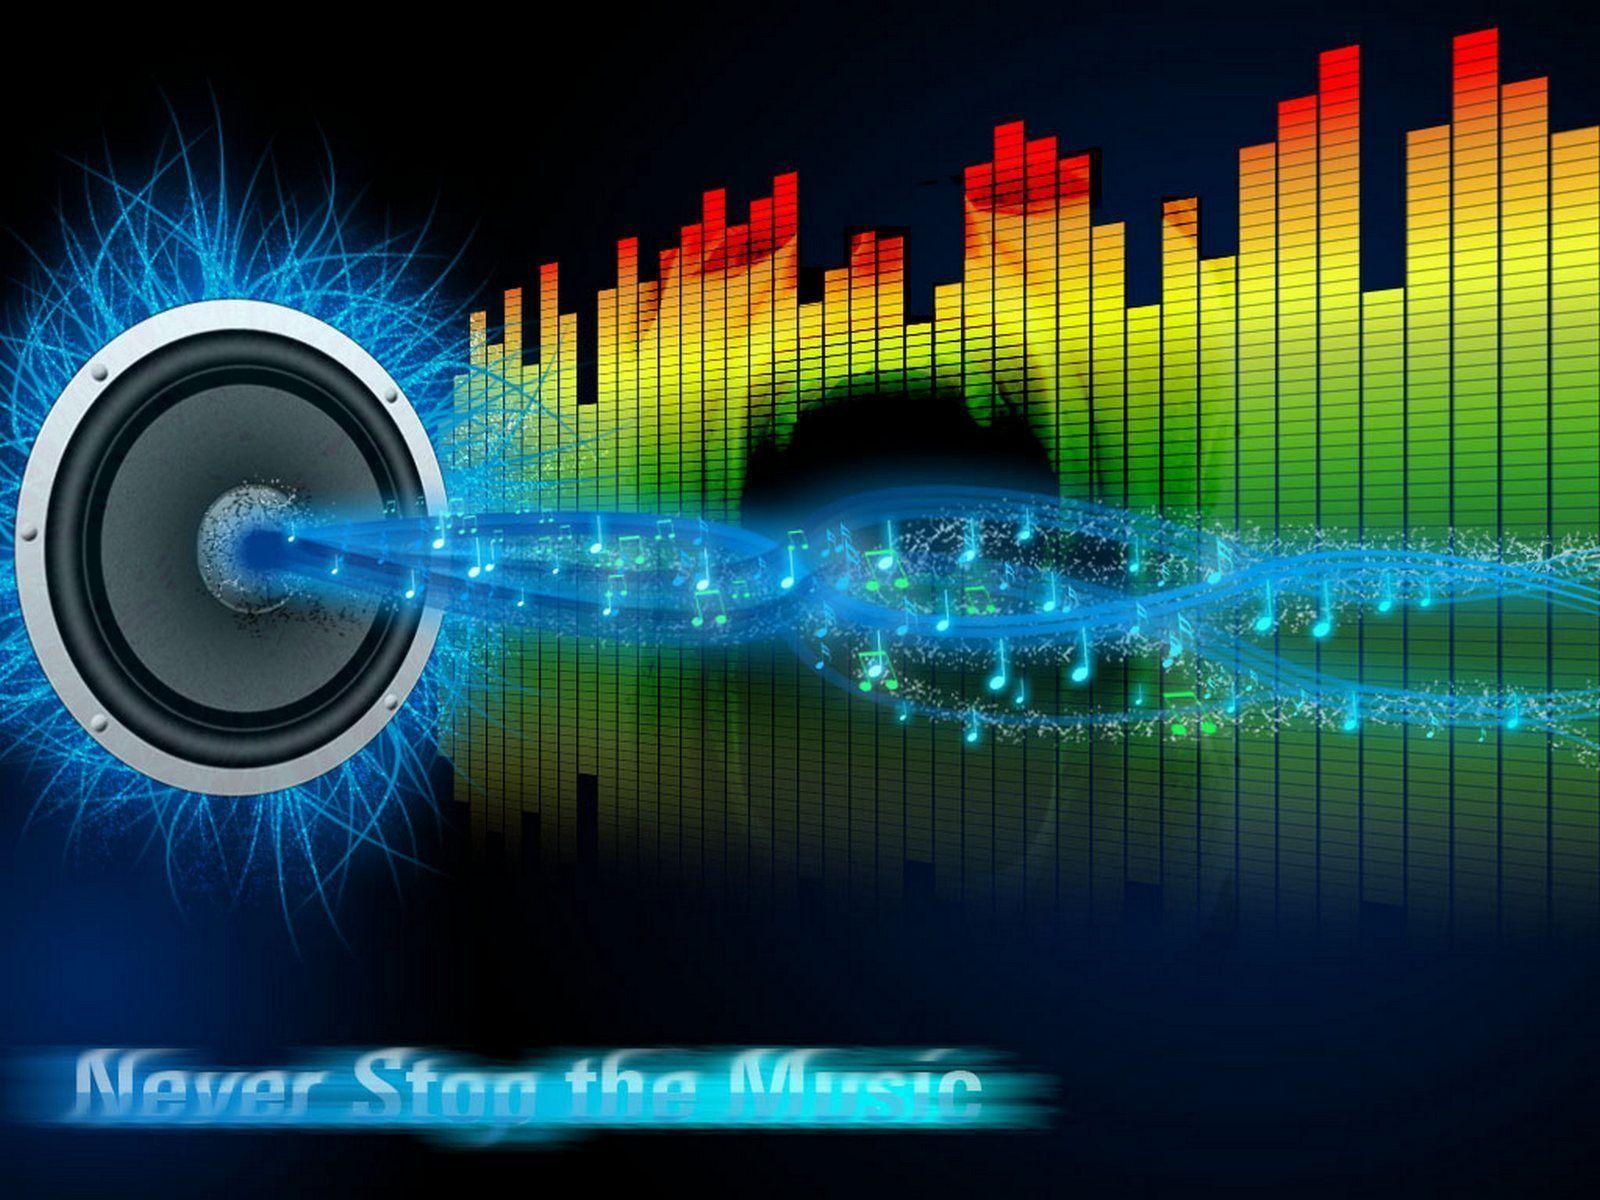 download non copyrighted background music